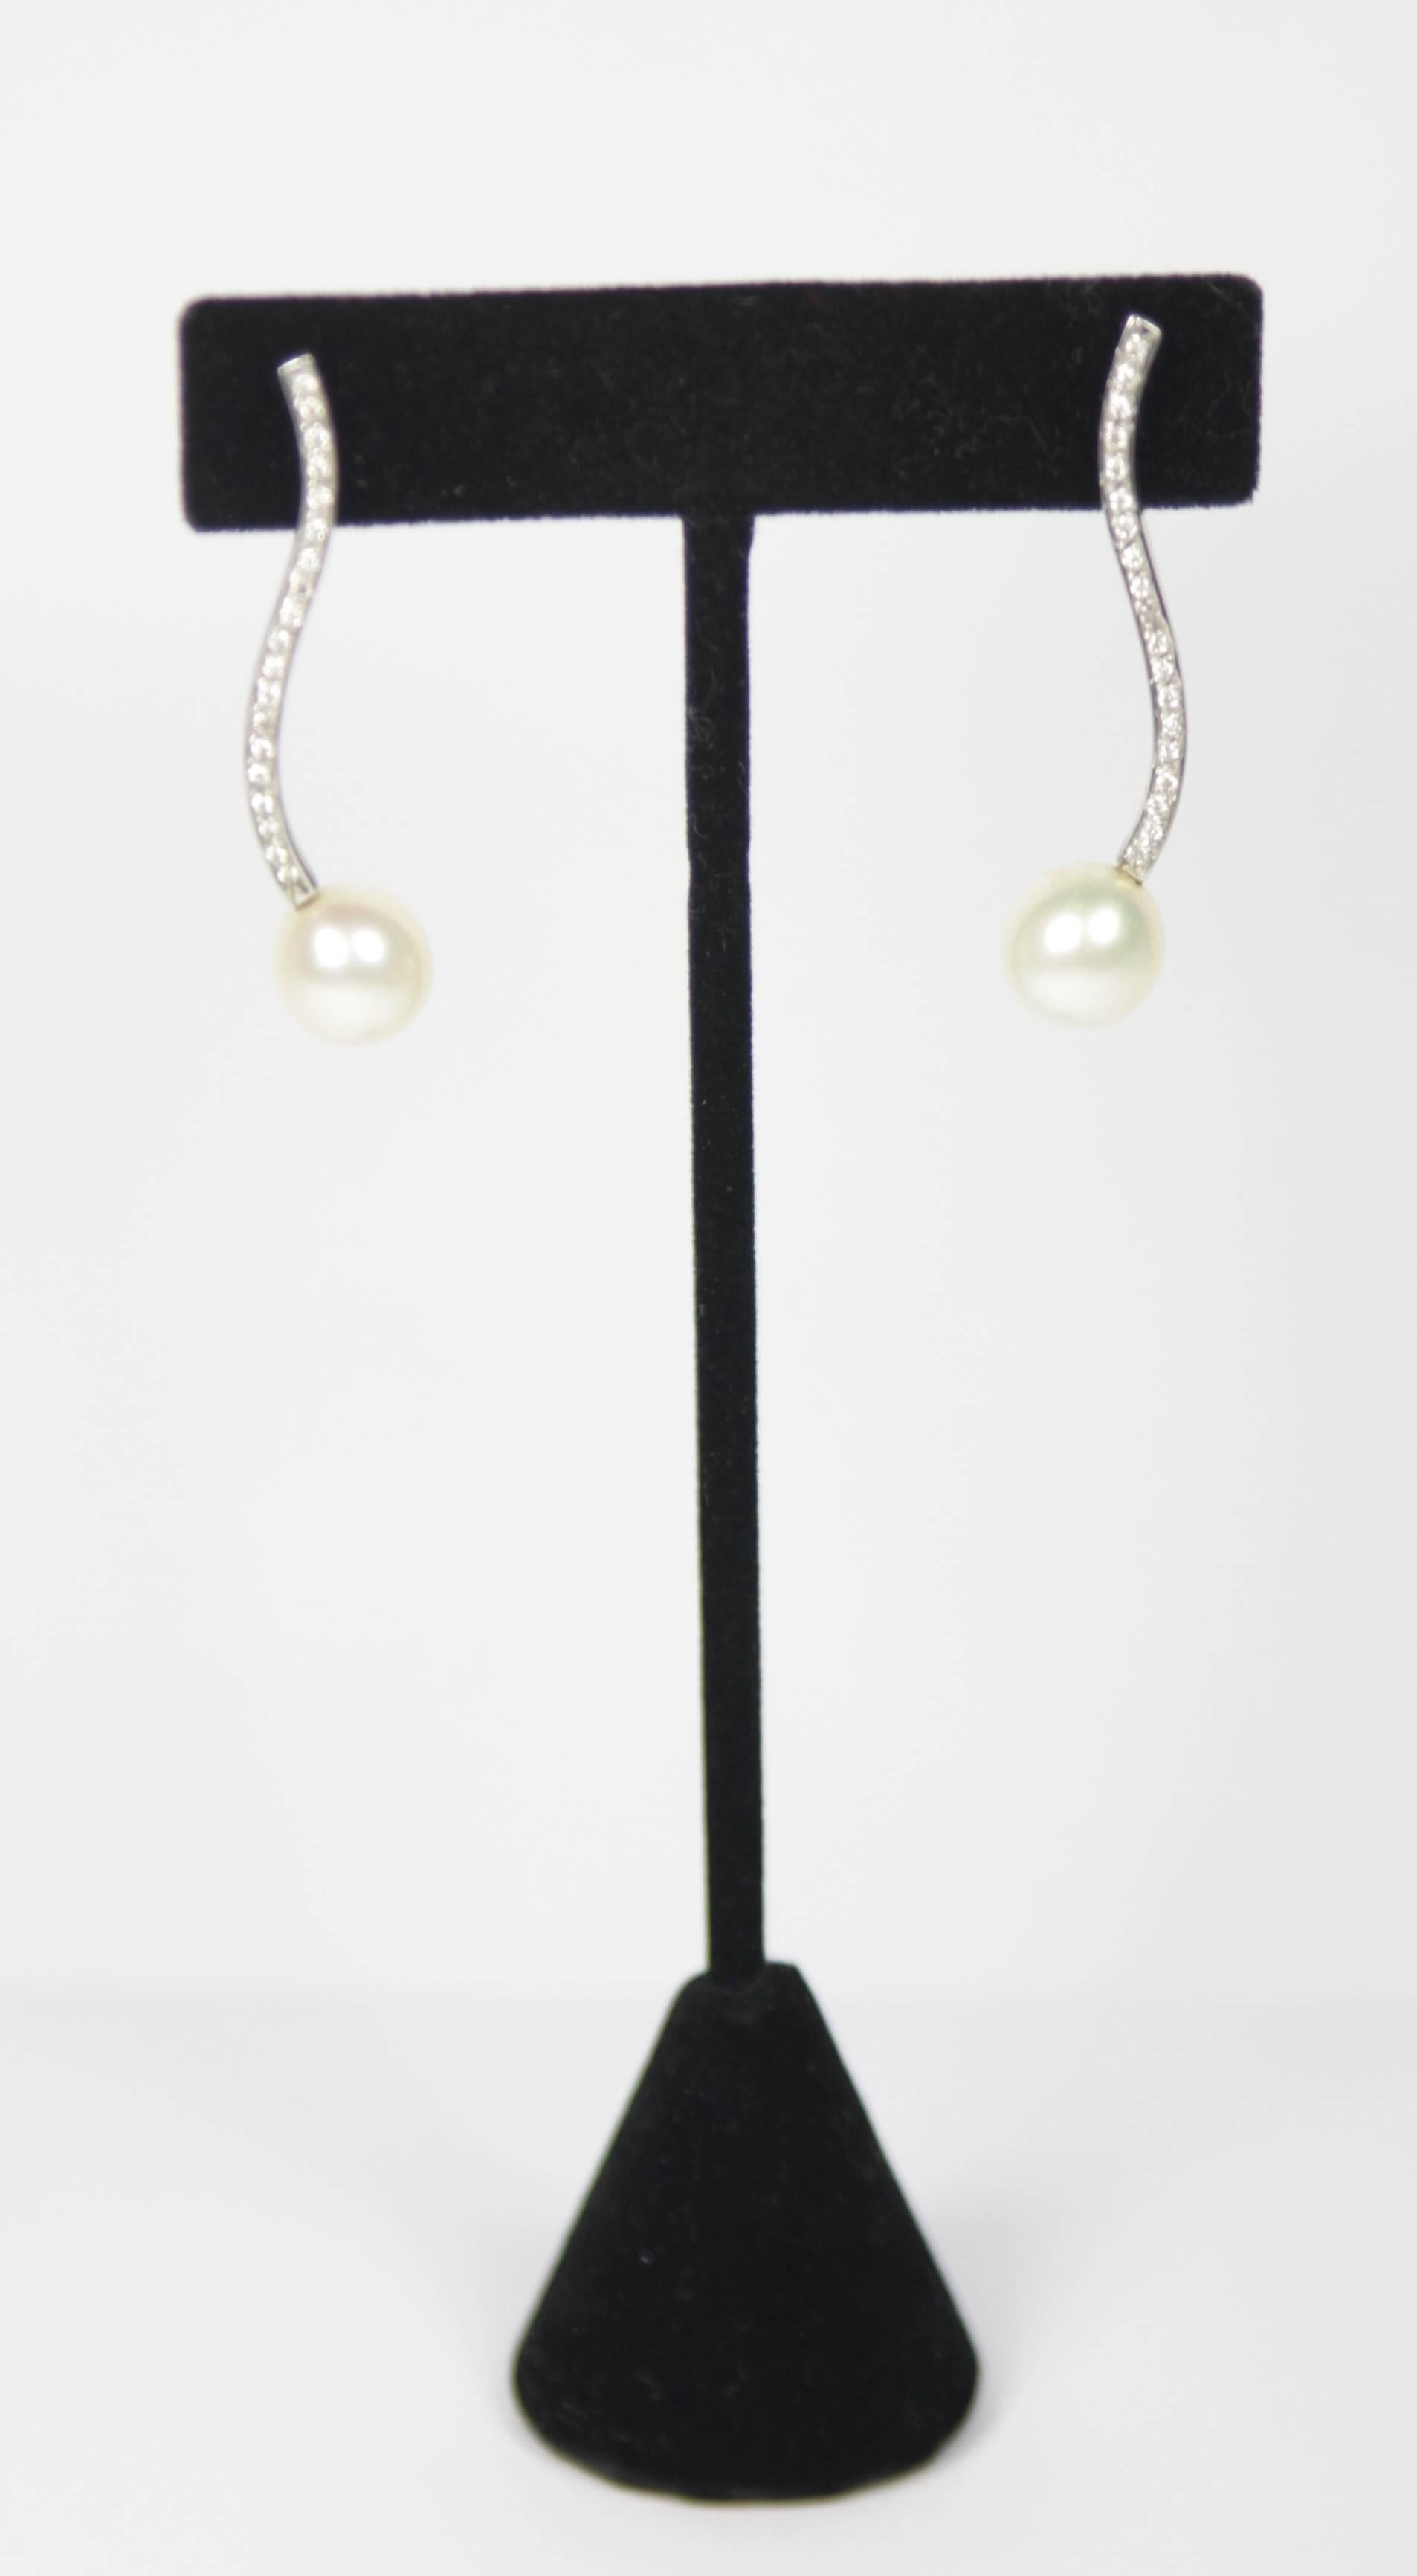 These pearl and diamond earrings are composed of 14kt white gold with pave diamonds featuring 10.2mm pearls.

Specs: 
14 KT White Gold 
Measures: 
1 5/8